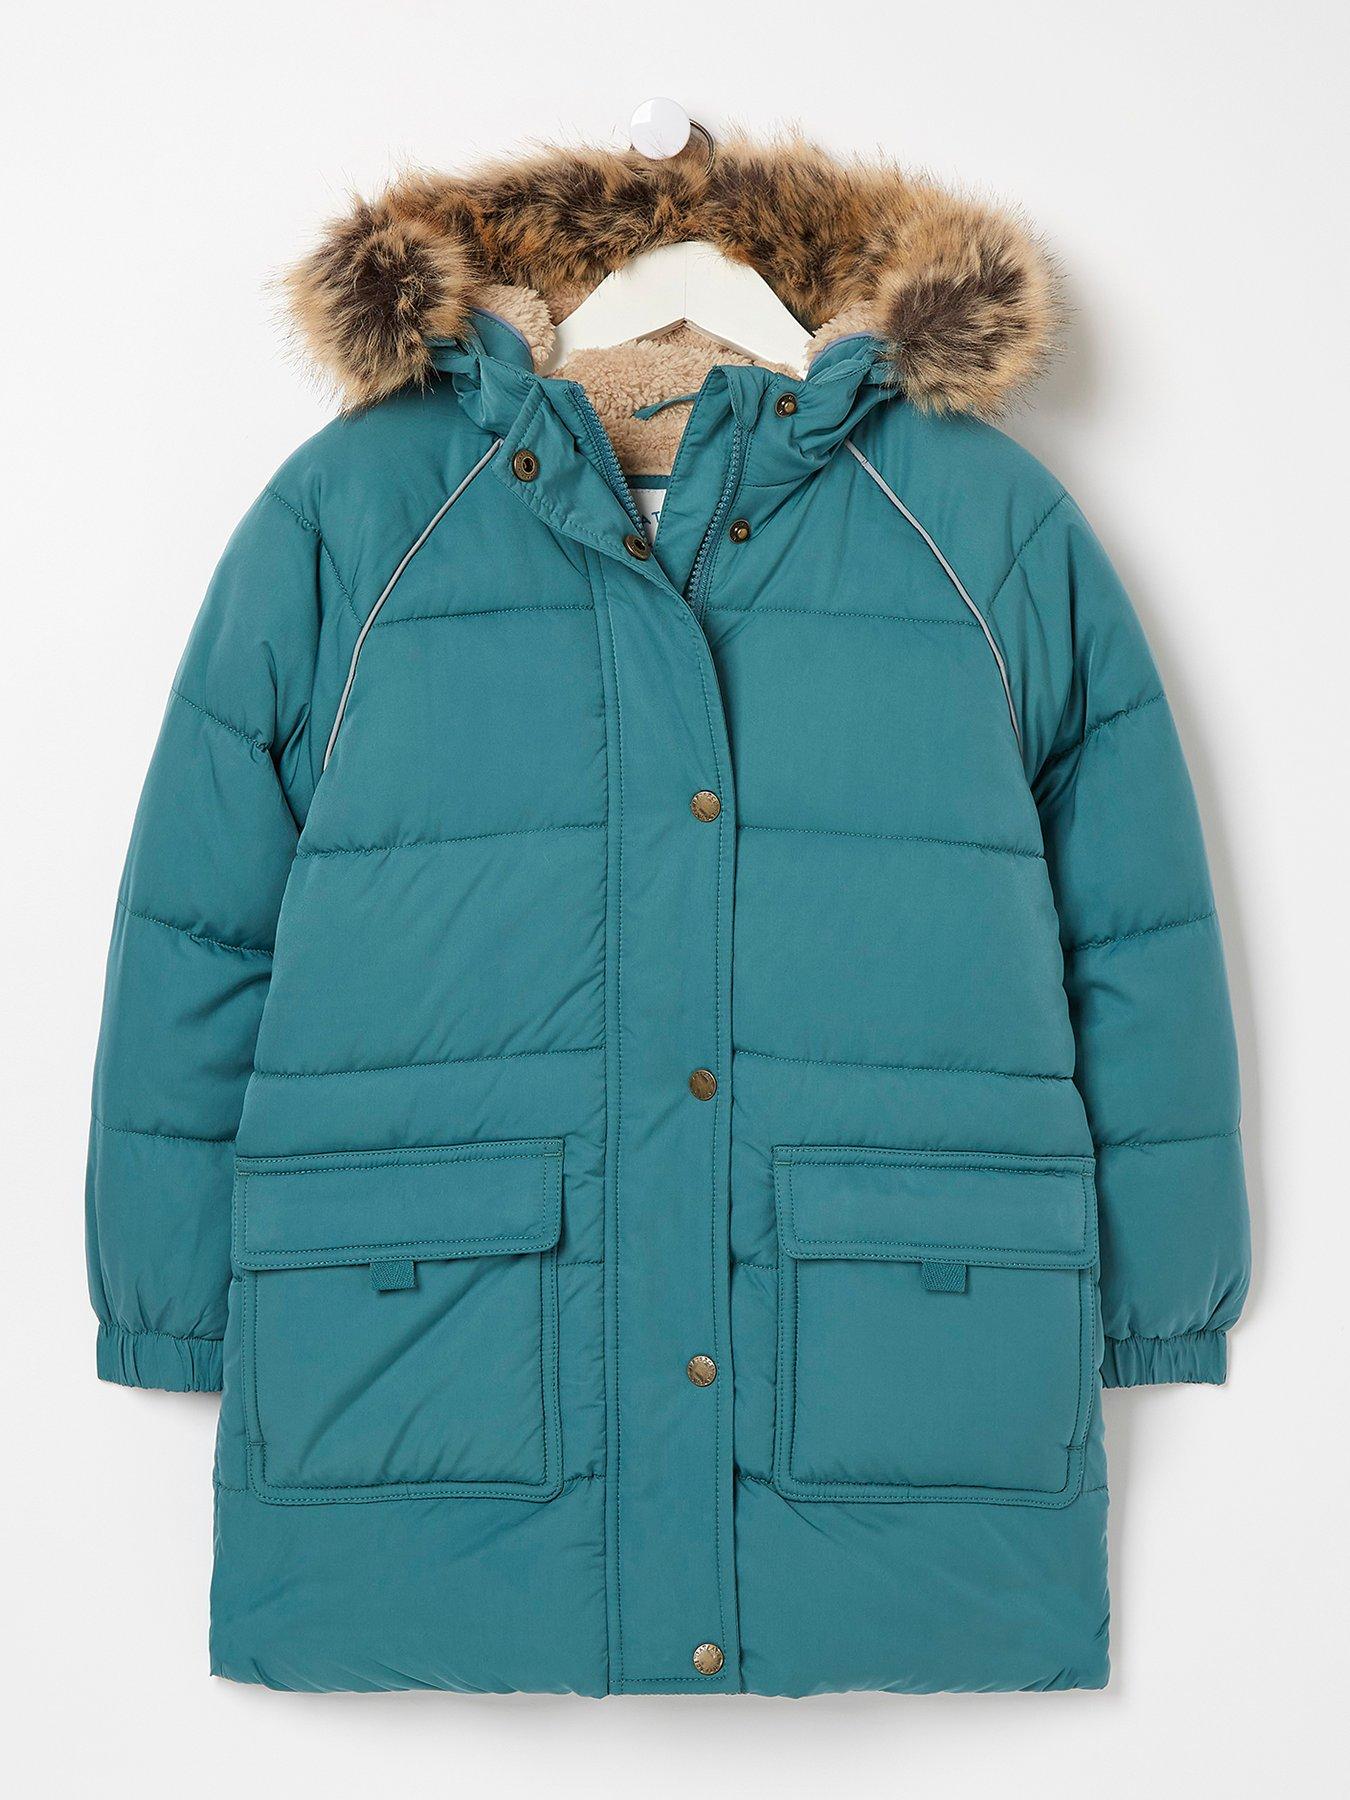 FatFace Girls Lily Longline Coat - Teal Green | very.co.uk